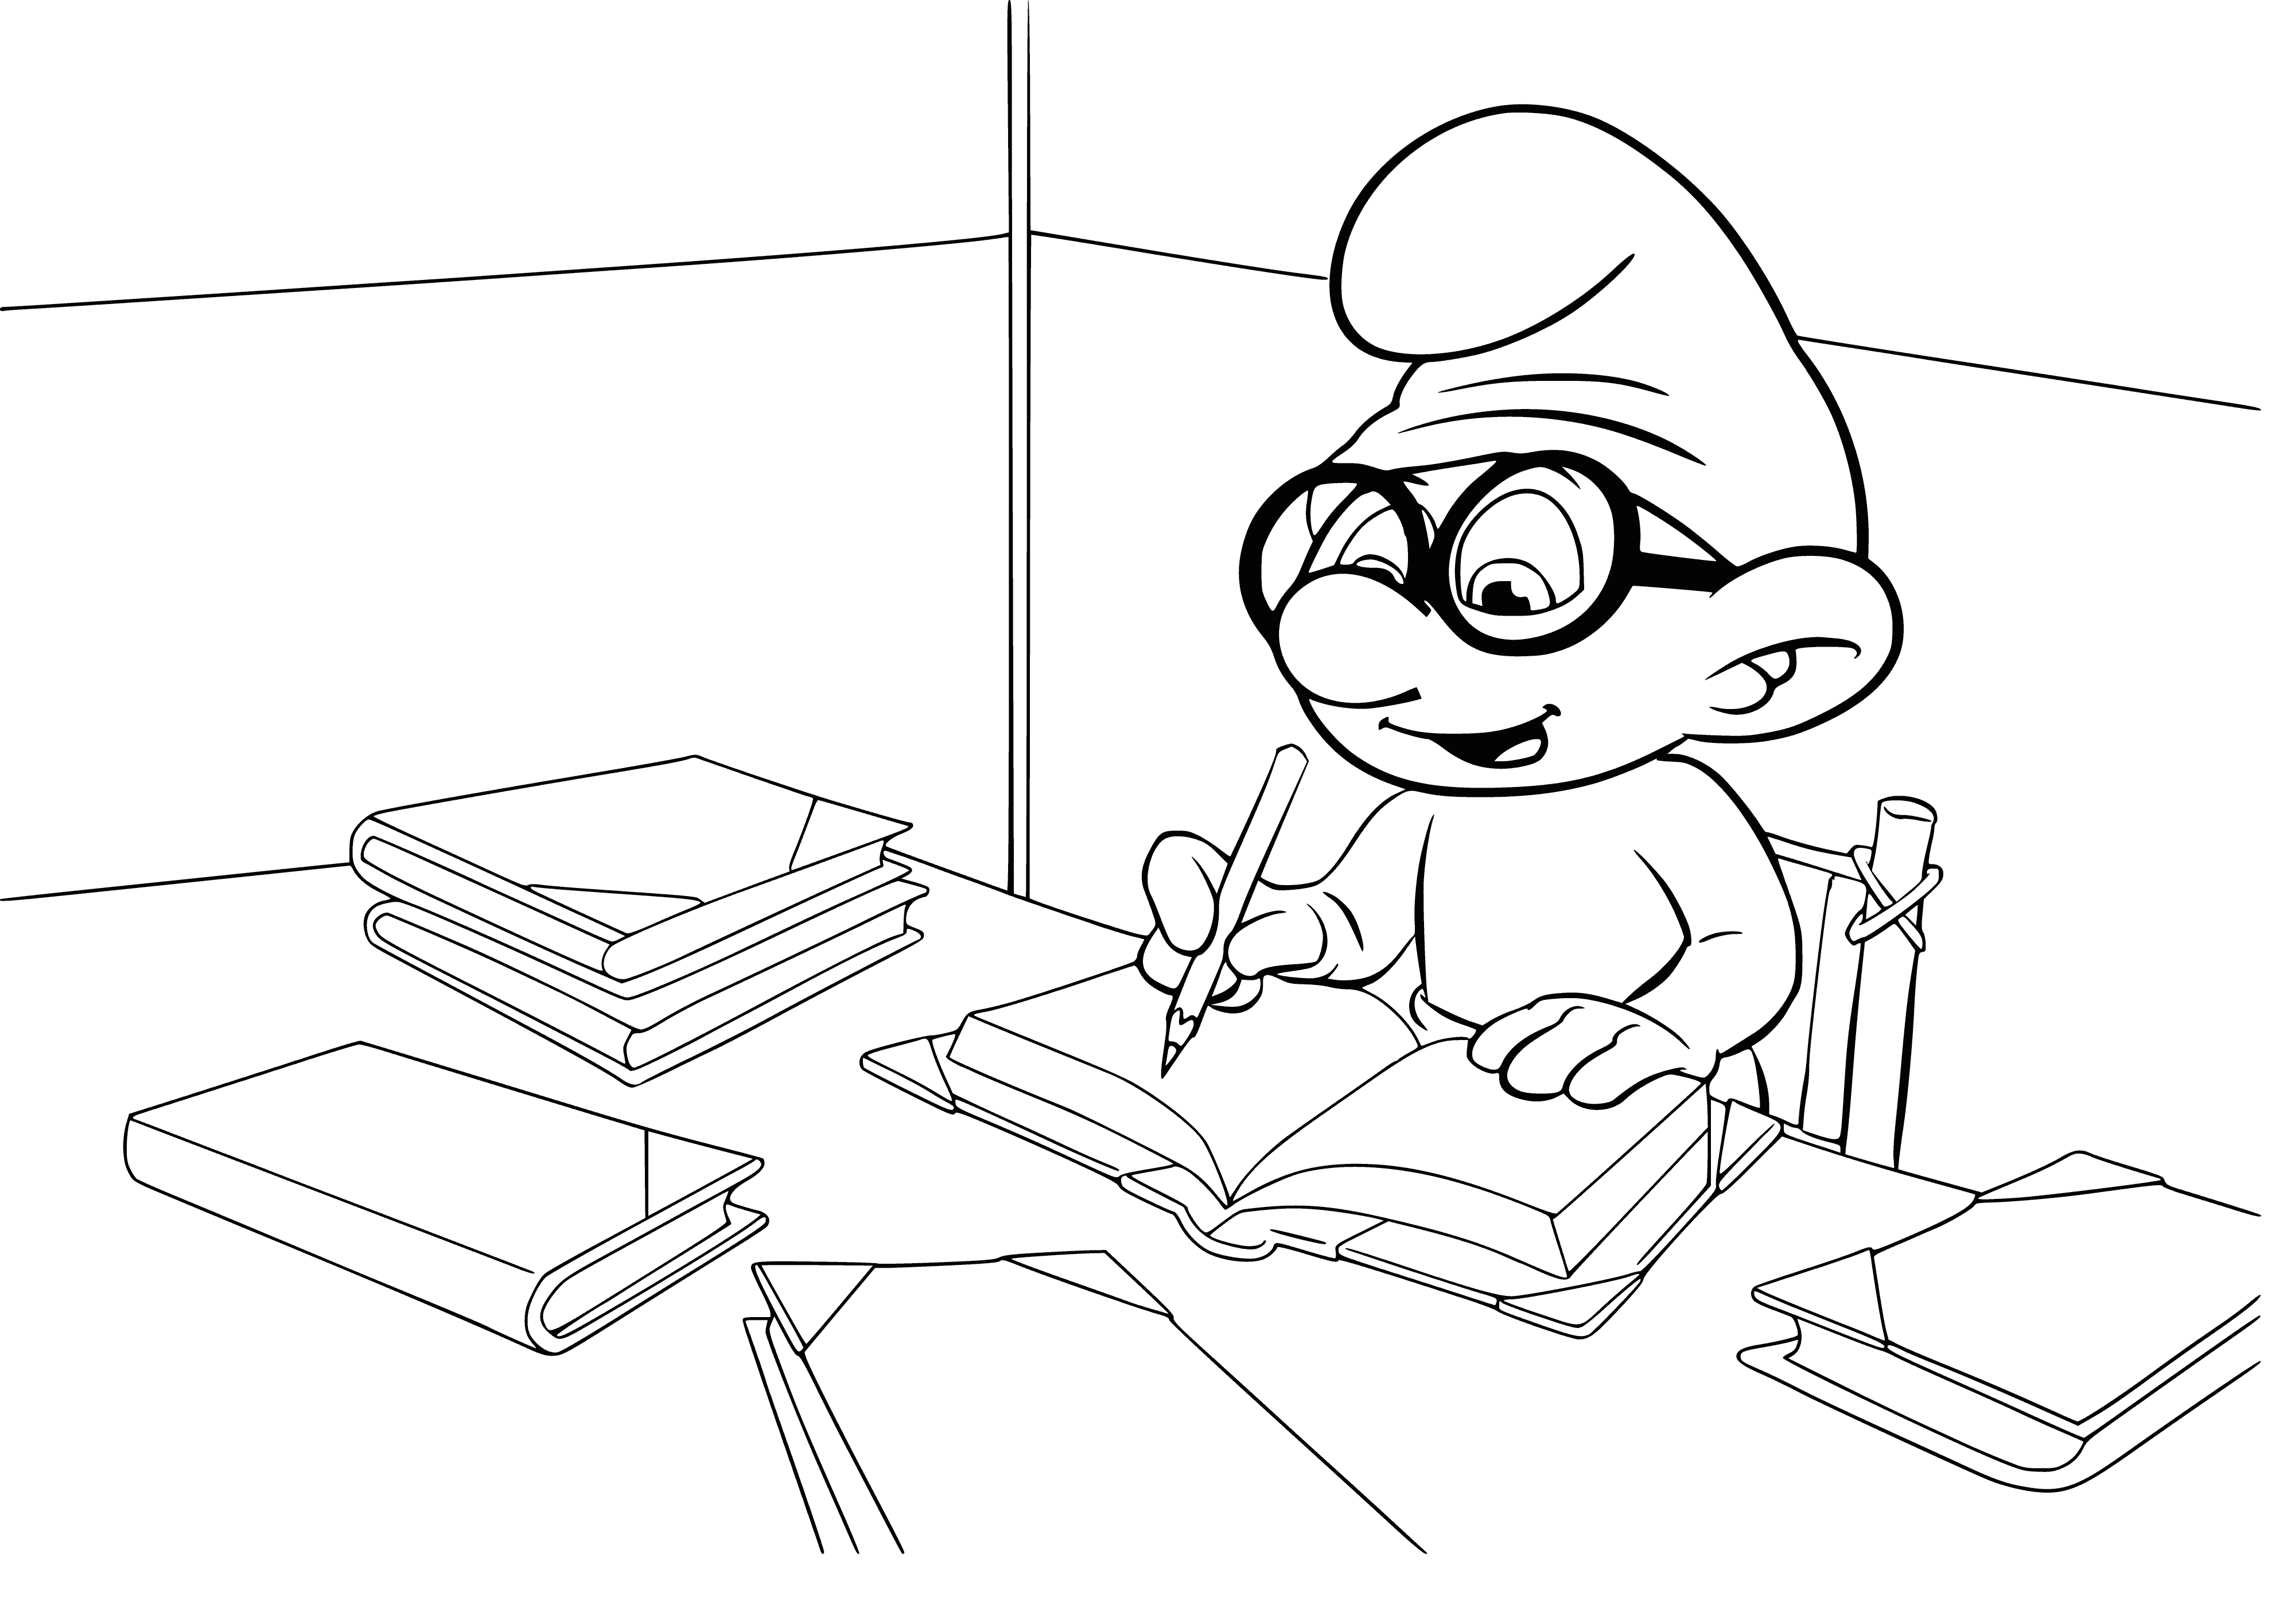 Smurf the Wise coloring page